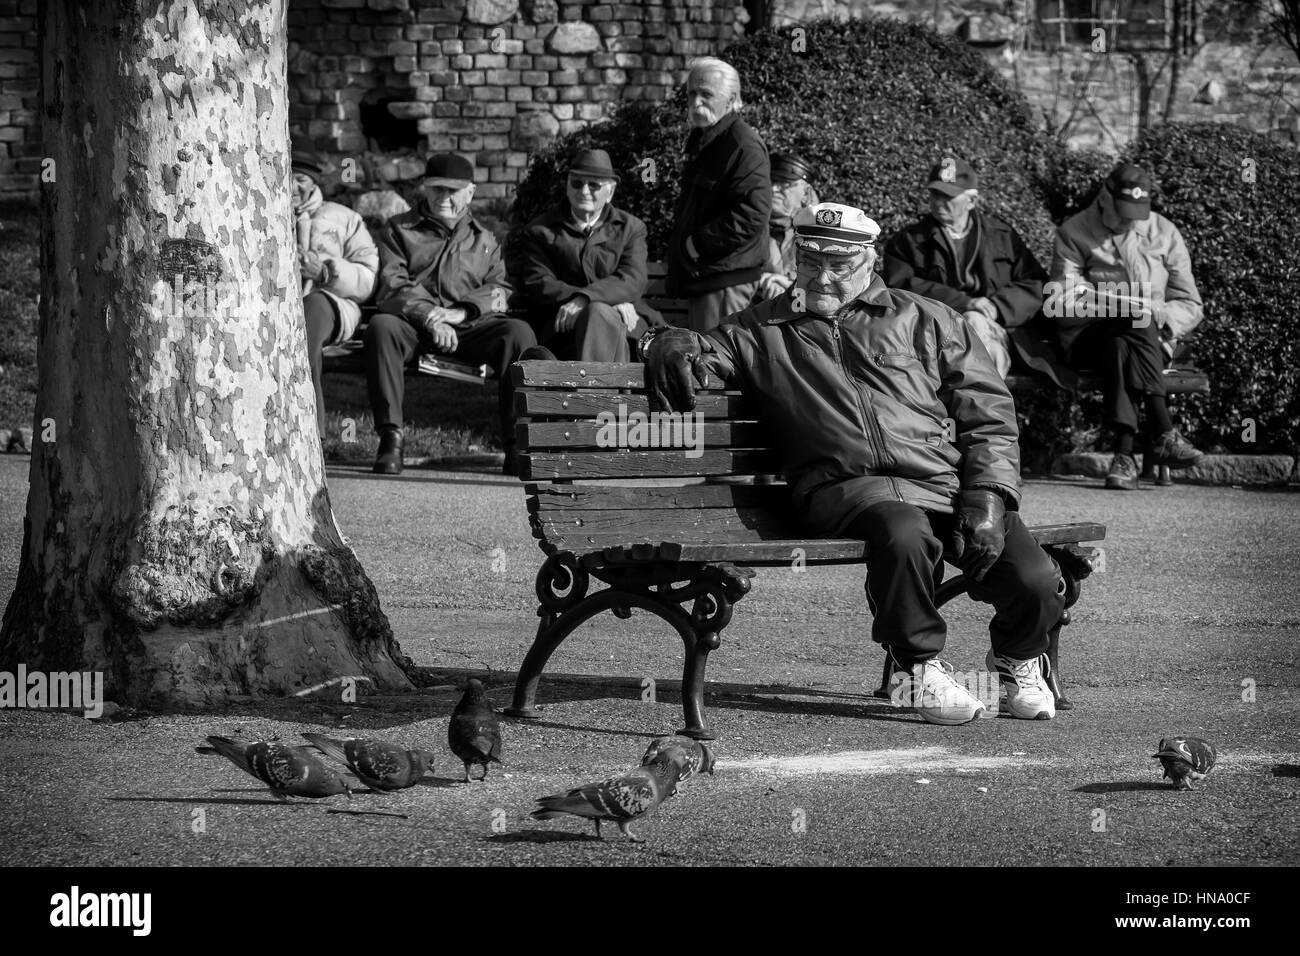 Belgrade, Serbia - February 27, 2016: Retirees enjoy the sun in the park on a bench and looking pigeons Stock Photo